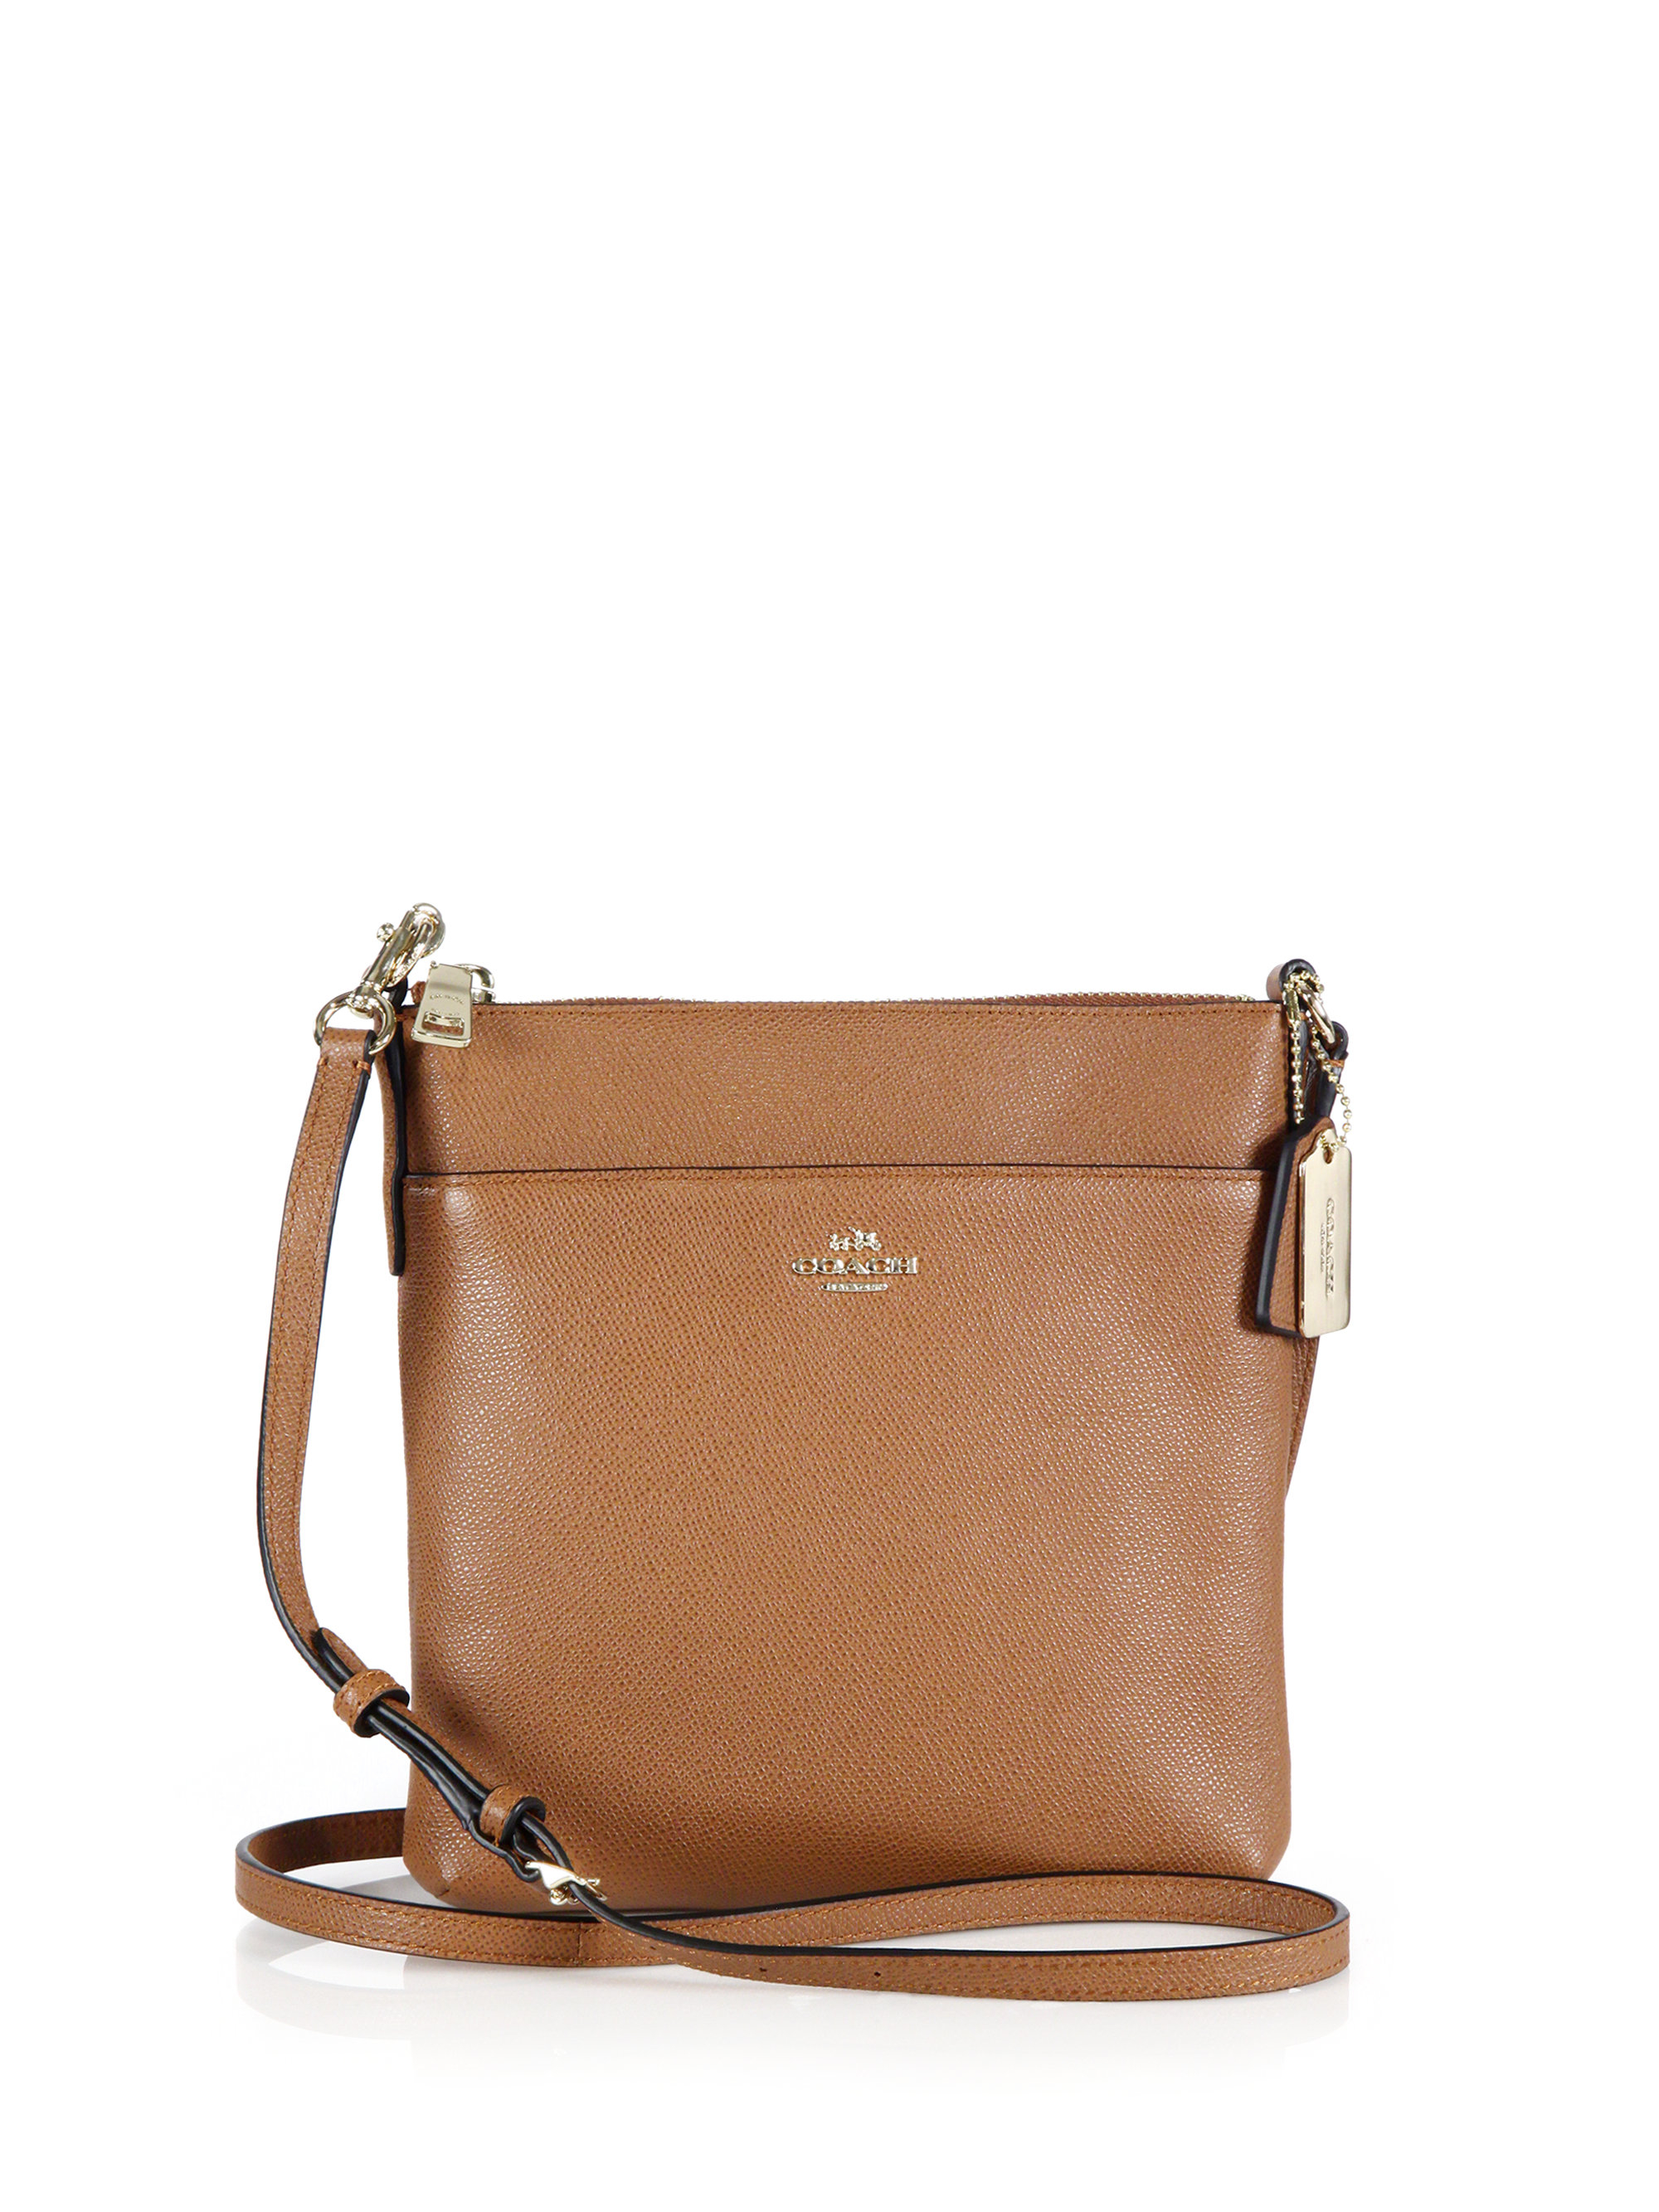 Coach North/South Leather Cross-Body Bag in Brown | Lyst